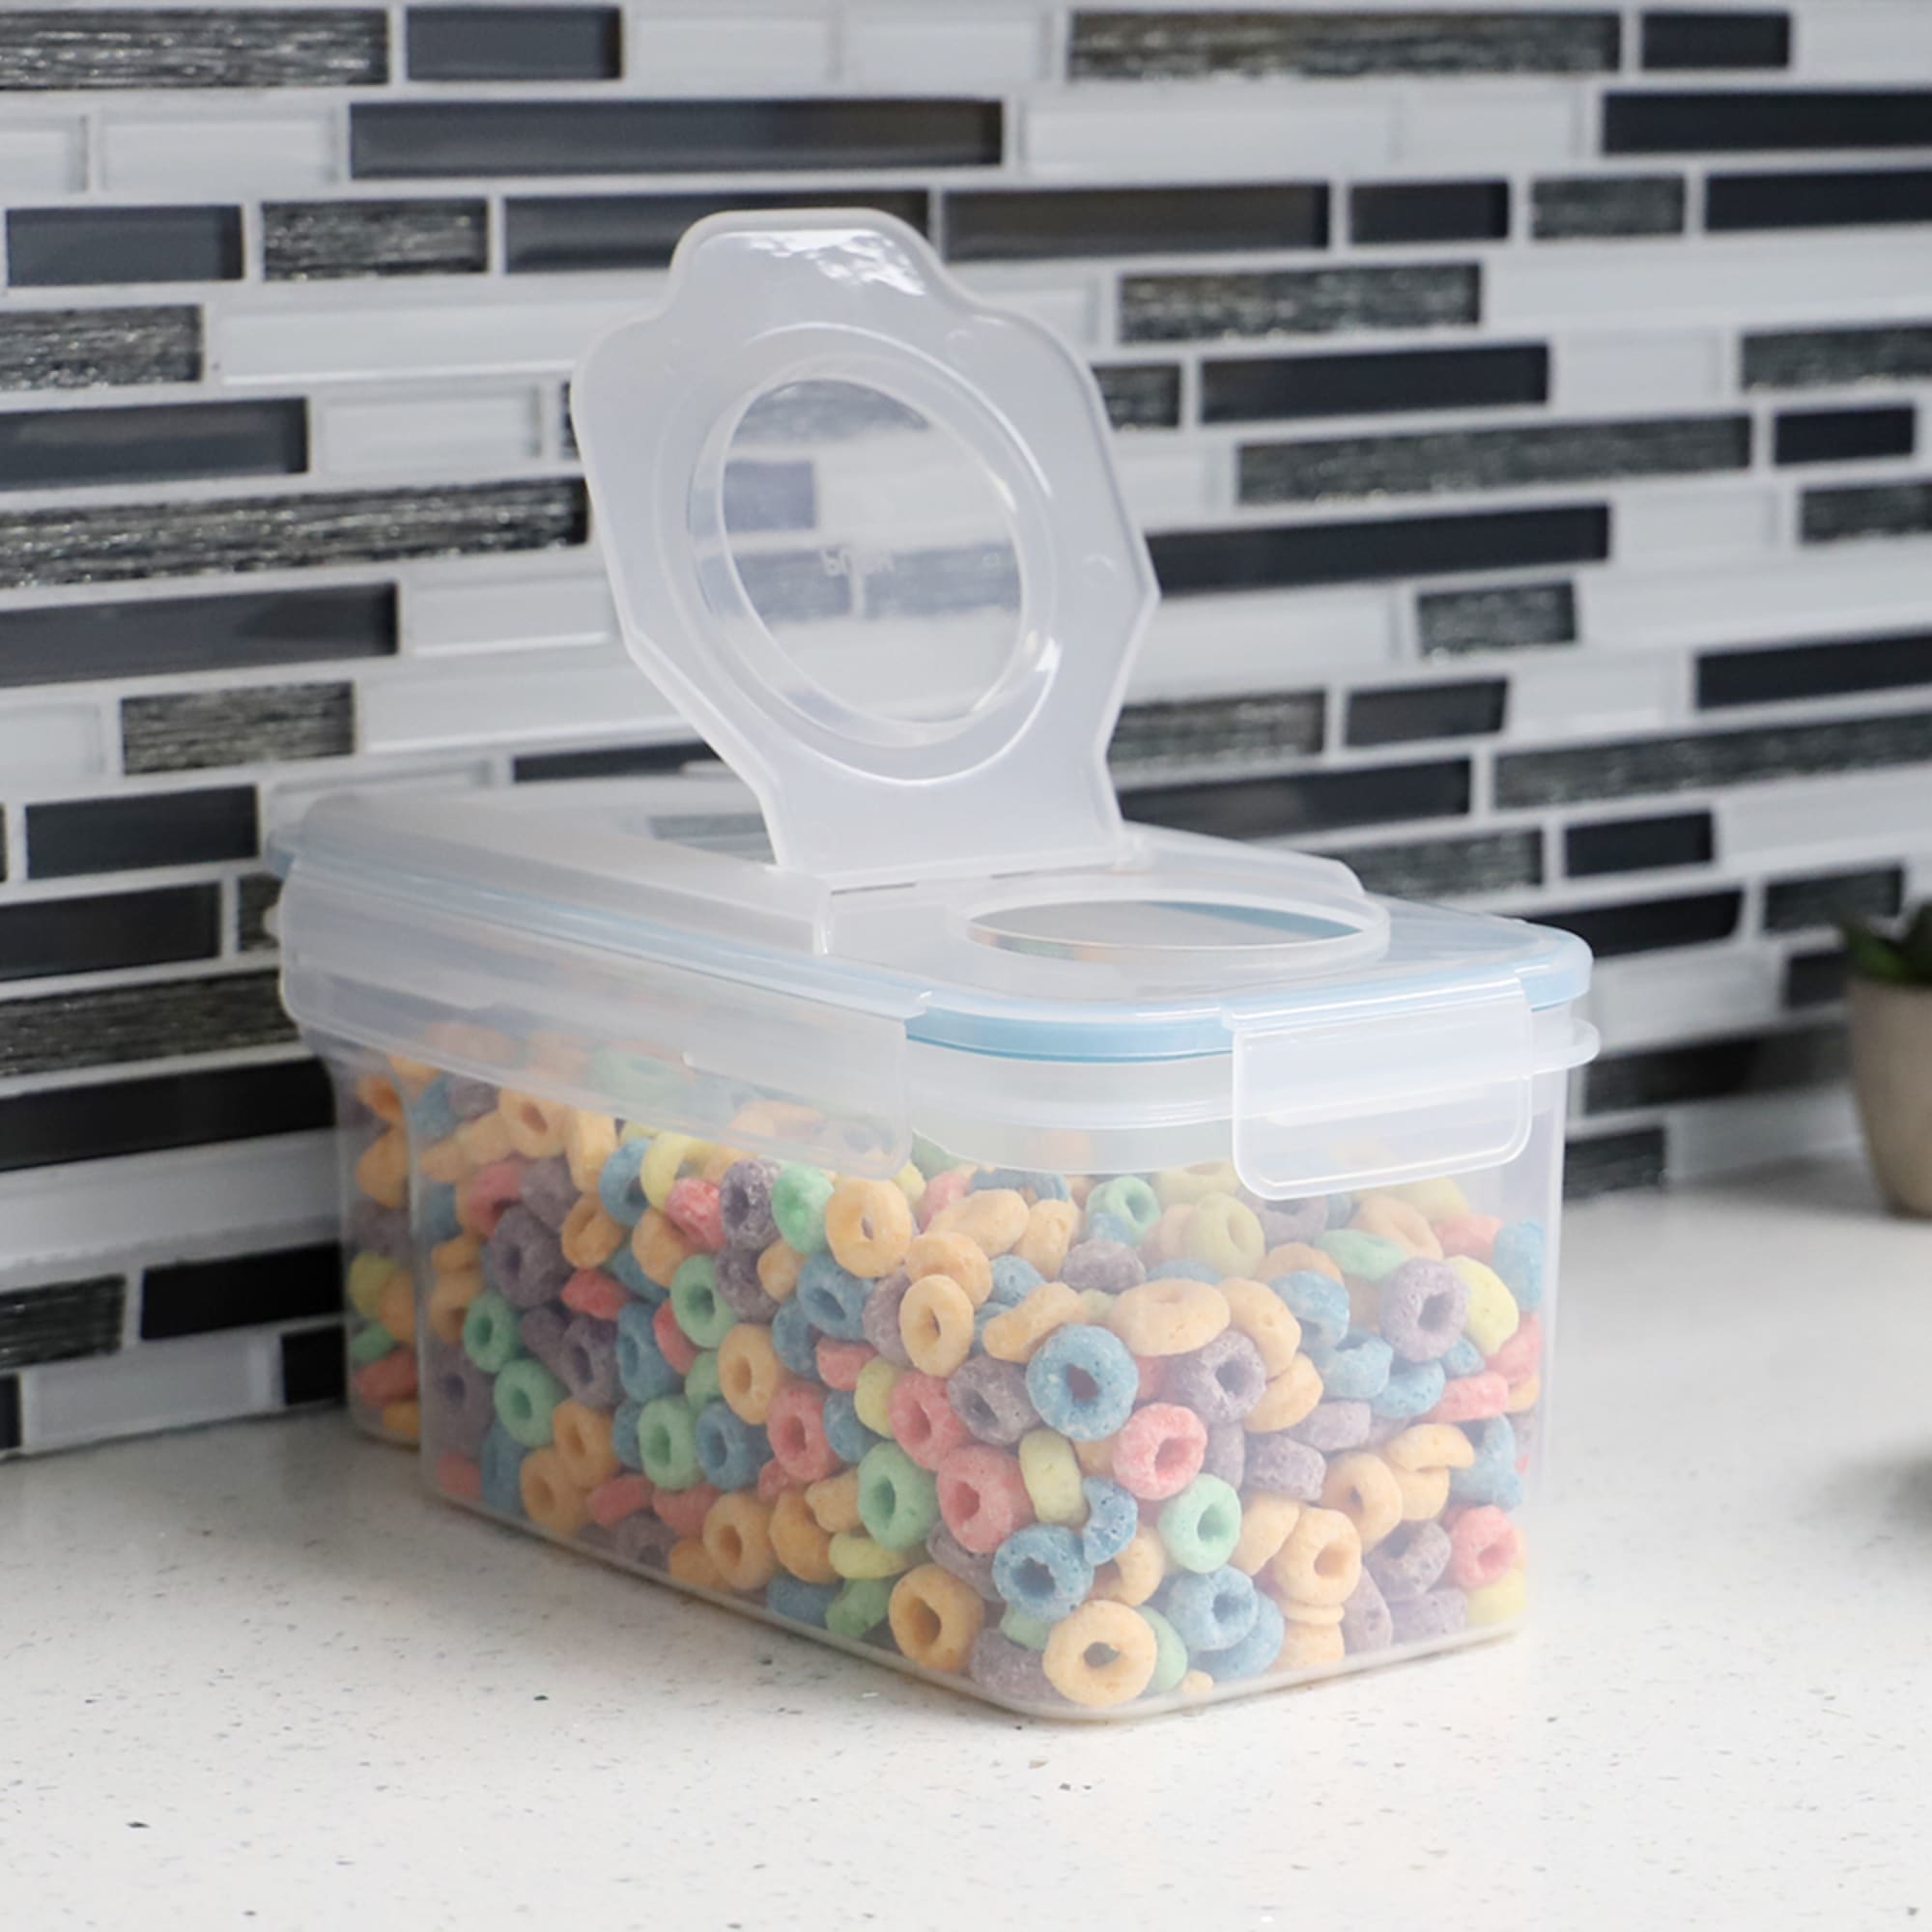 Home Basics Small Plastic Cereal Dispenser with Pour Spout, Clear